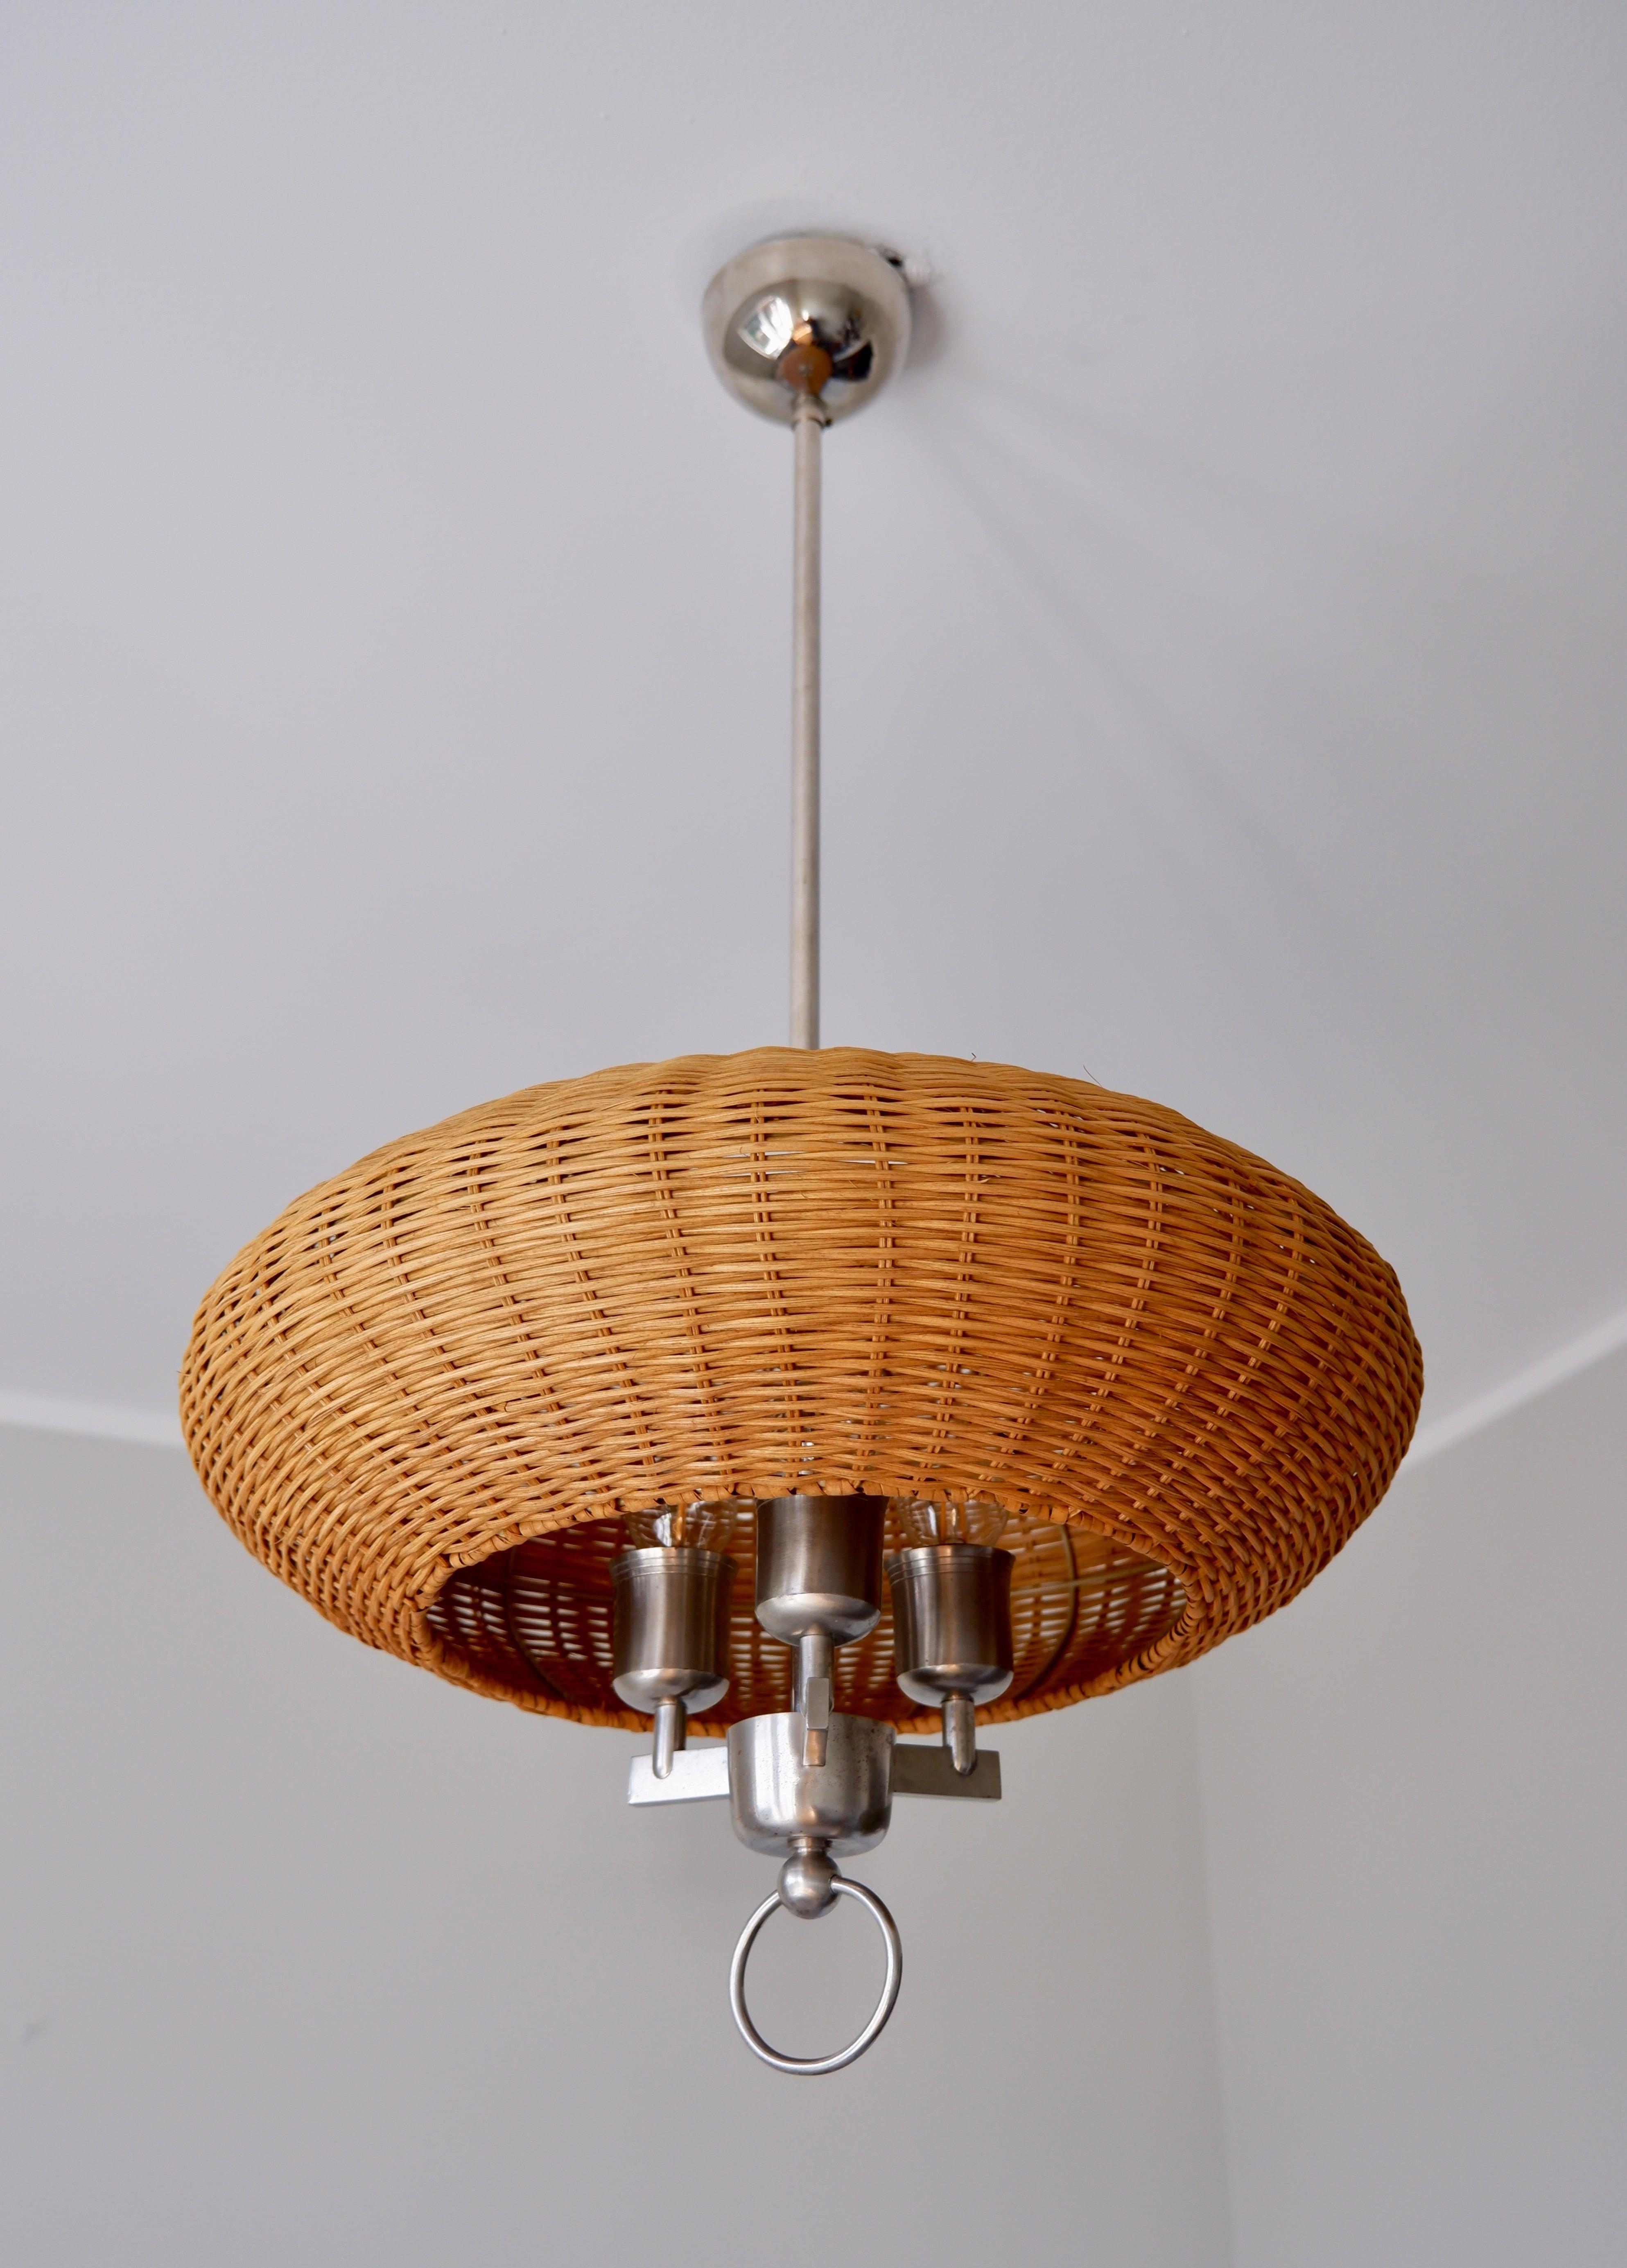 Paavo Tynell ceiling lamp made by Taito in the 40s. The lamp is made in Nikel plated brass with a wood strip shade which has been replace from the original shade after restoration. This model is one of the first ever design by Paavo Tynell during